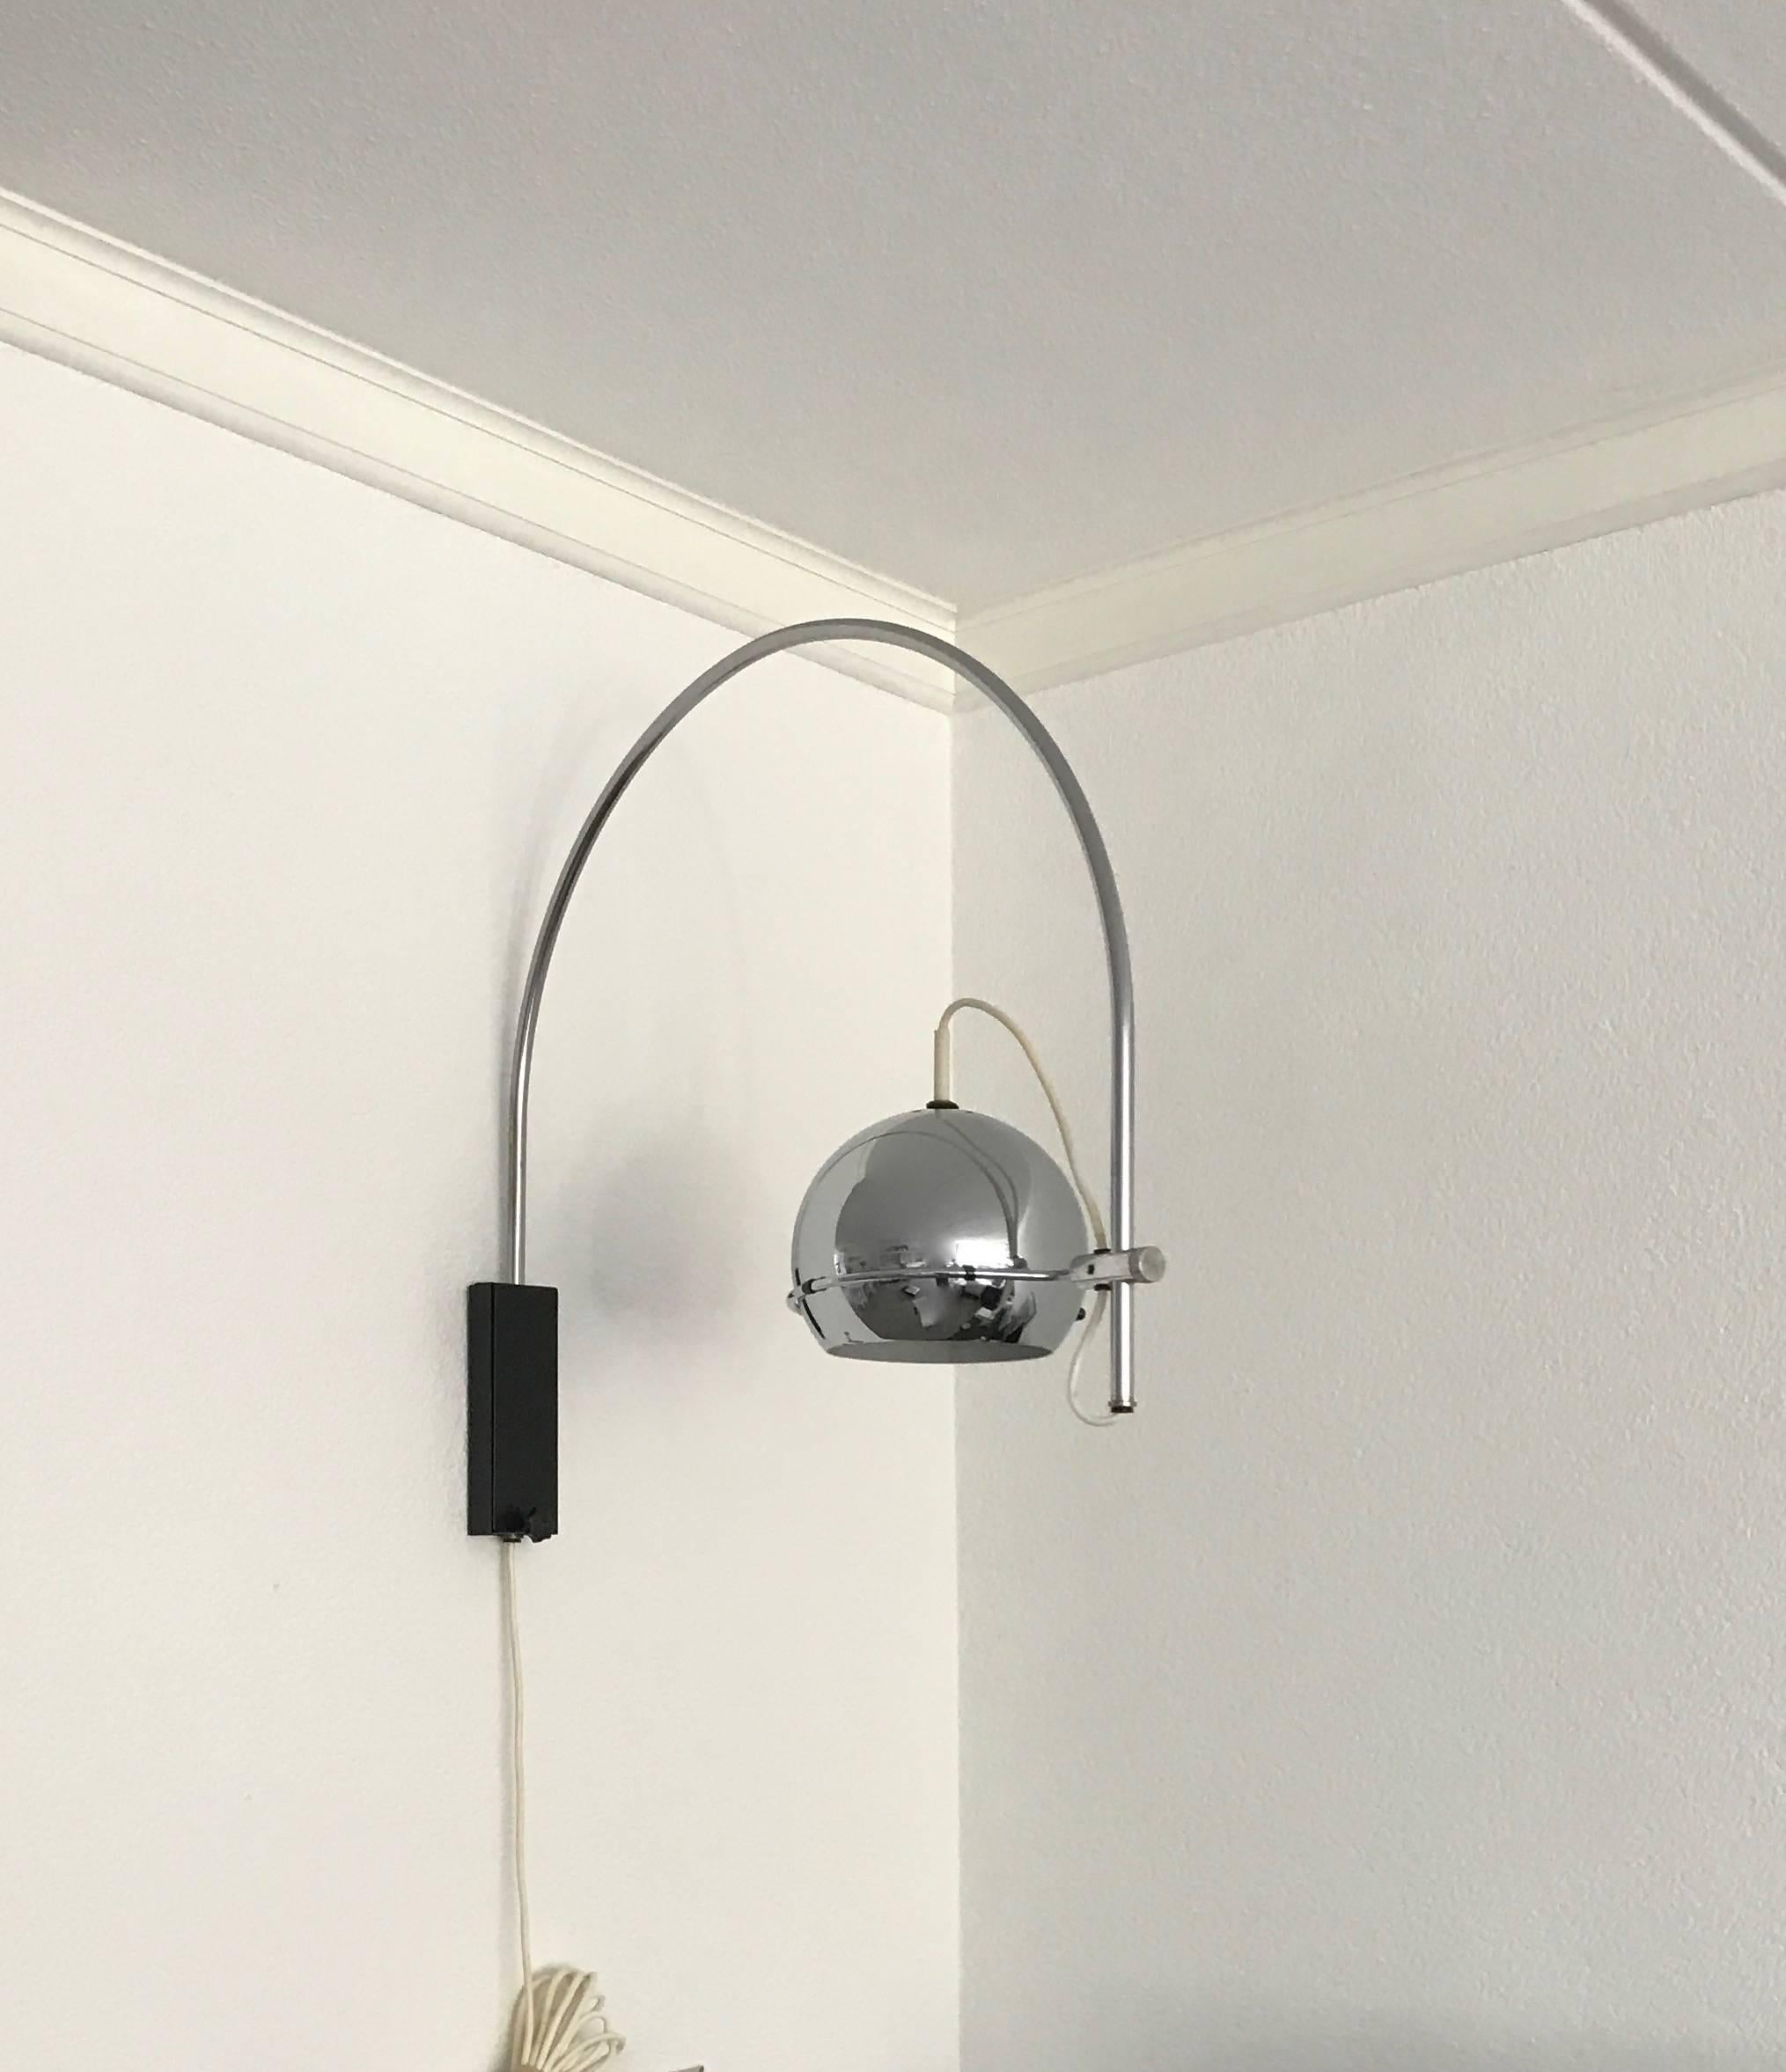 Vintage 1960s Adjustable Chrome Metal Globe Wall Lamp with Arched Chrome Arm In Excellent Condition For Sale In Lisse, NL